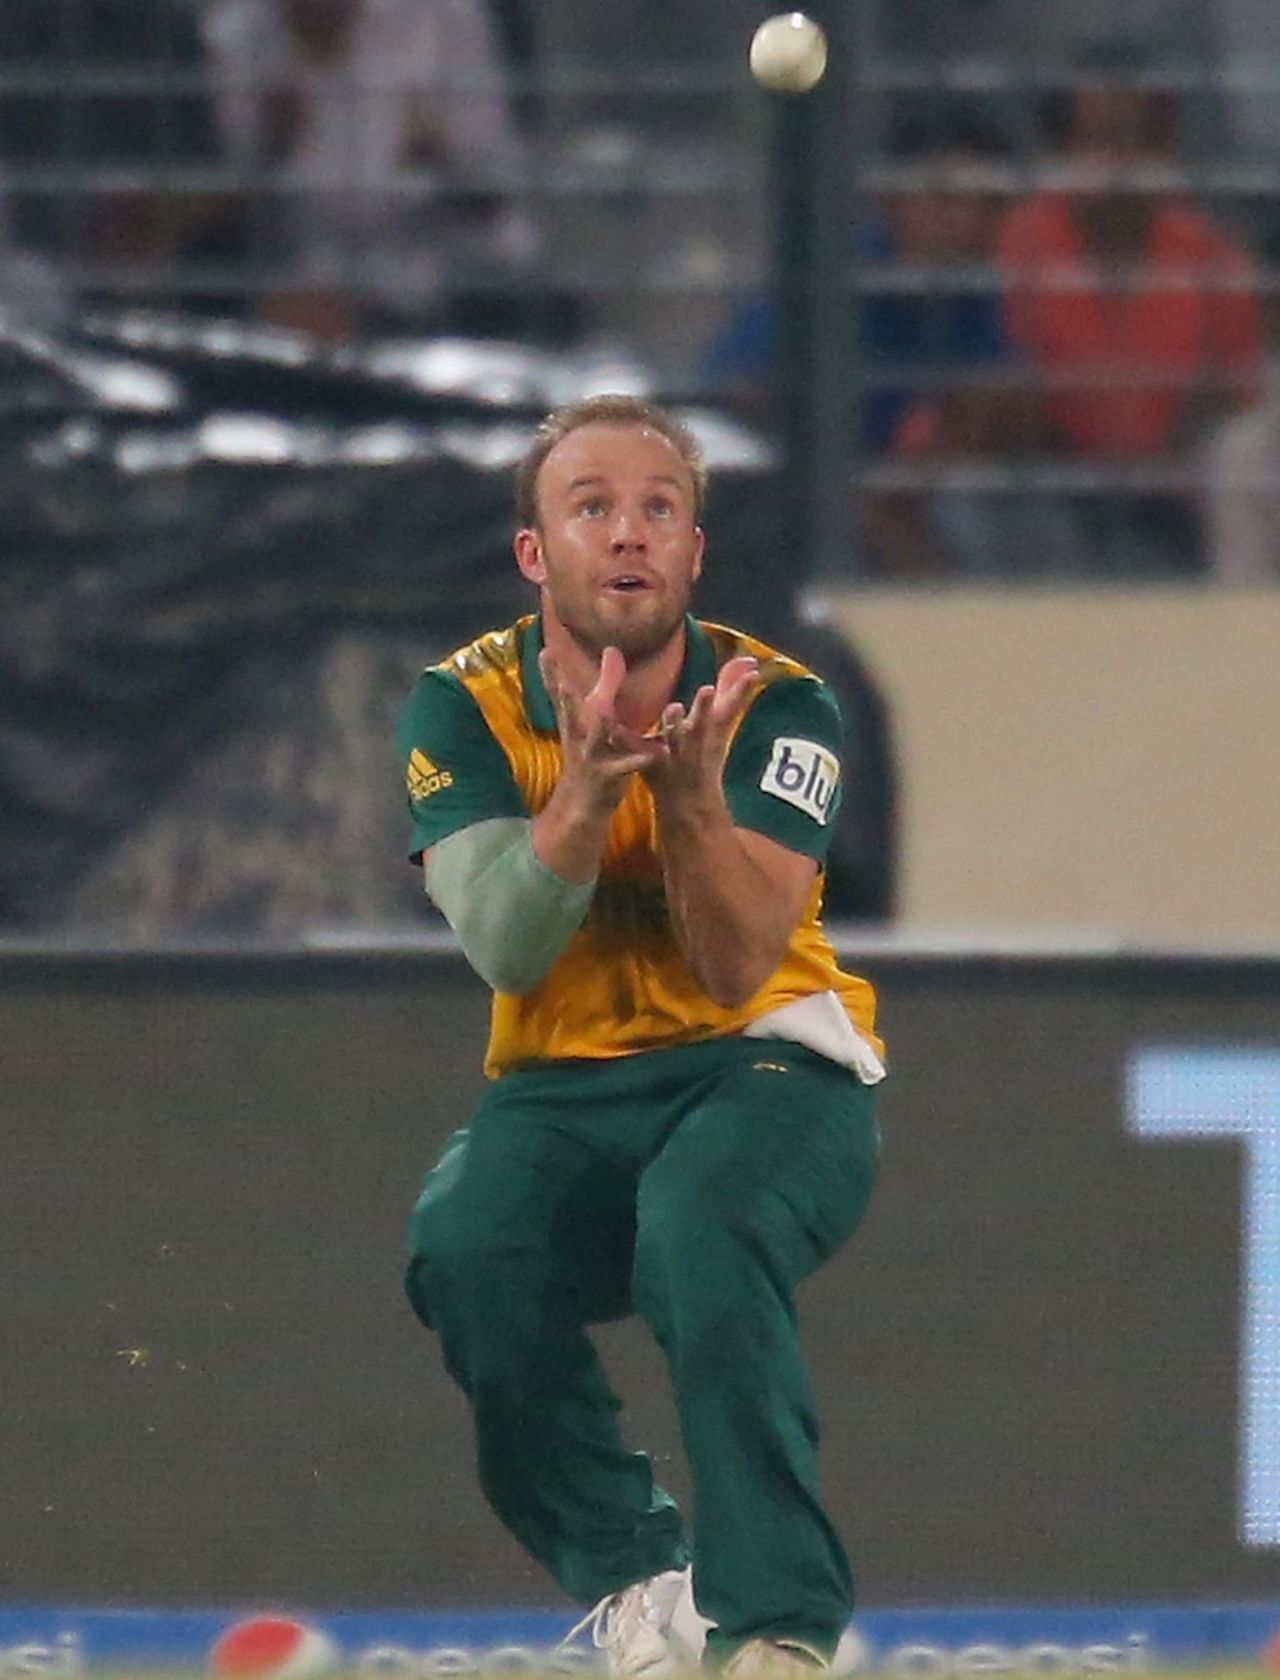 AB de Villiers readies himself for a catch, India v South Africa, World T20, semi-final, Mirpur, April 4, 2014